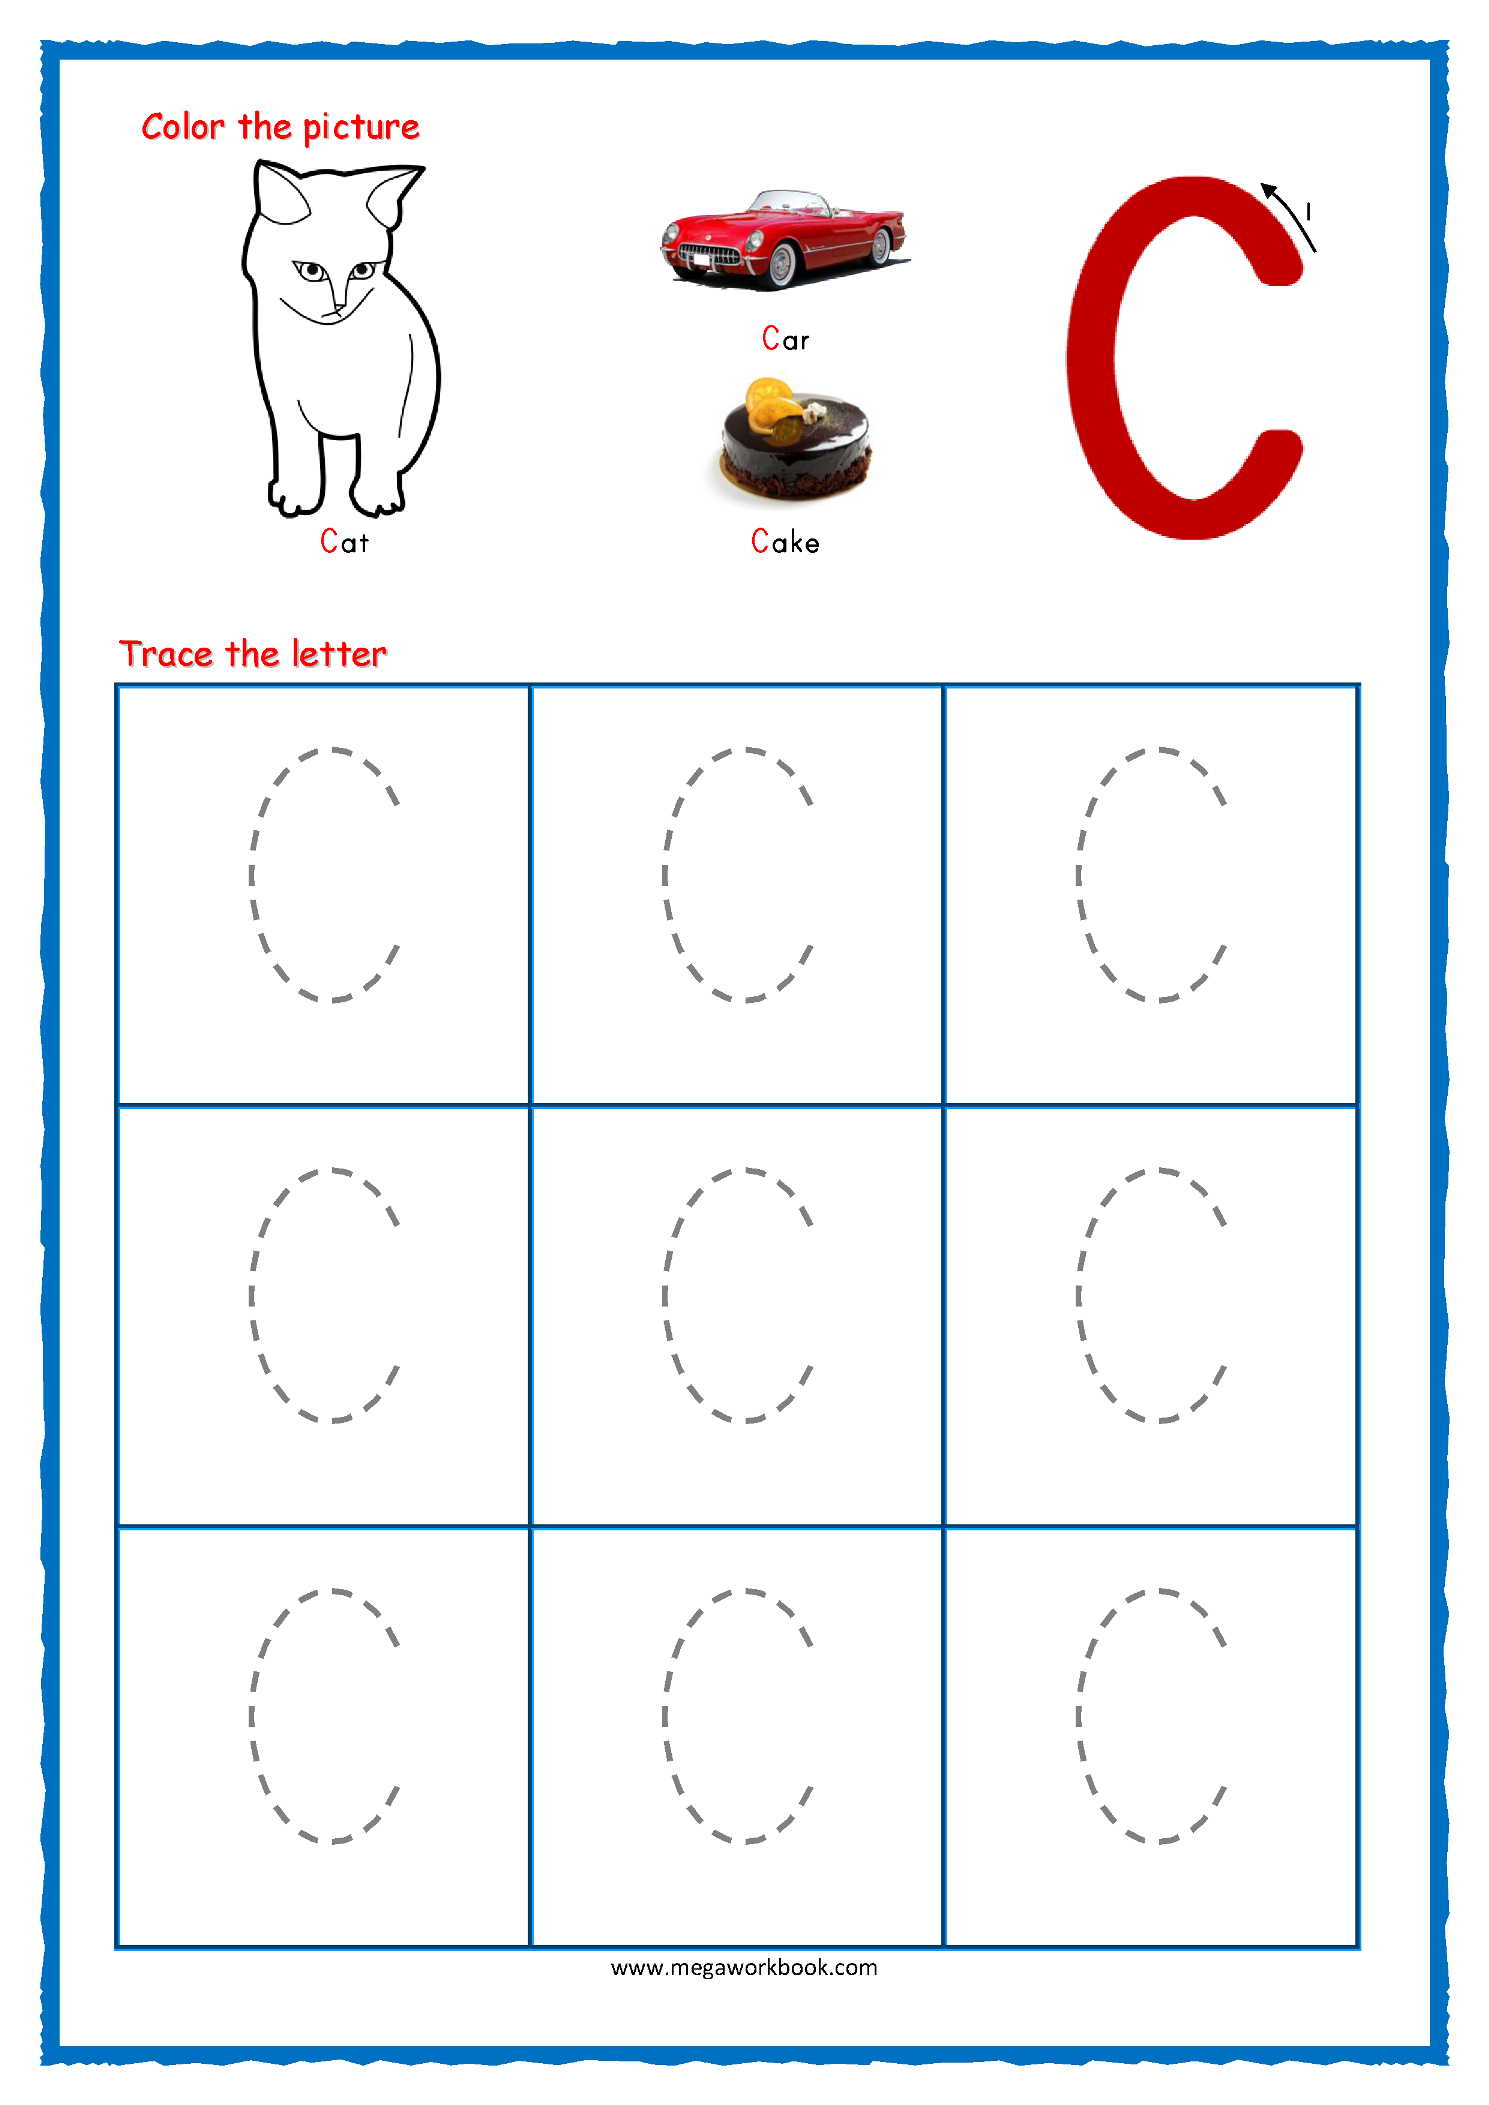 Tracing Letters - Alphabet Tracing - Capital Letters intended for I Letter Tracing Worksheet